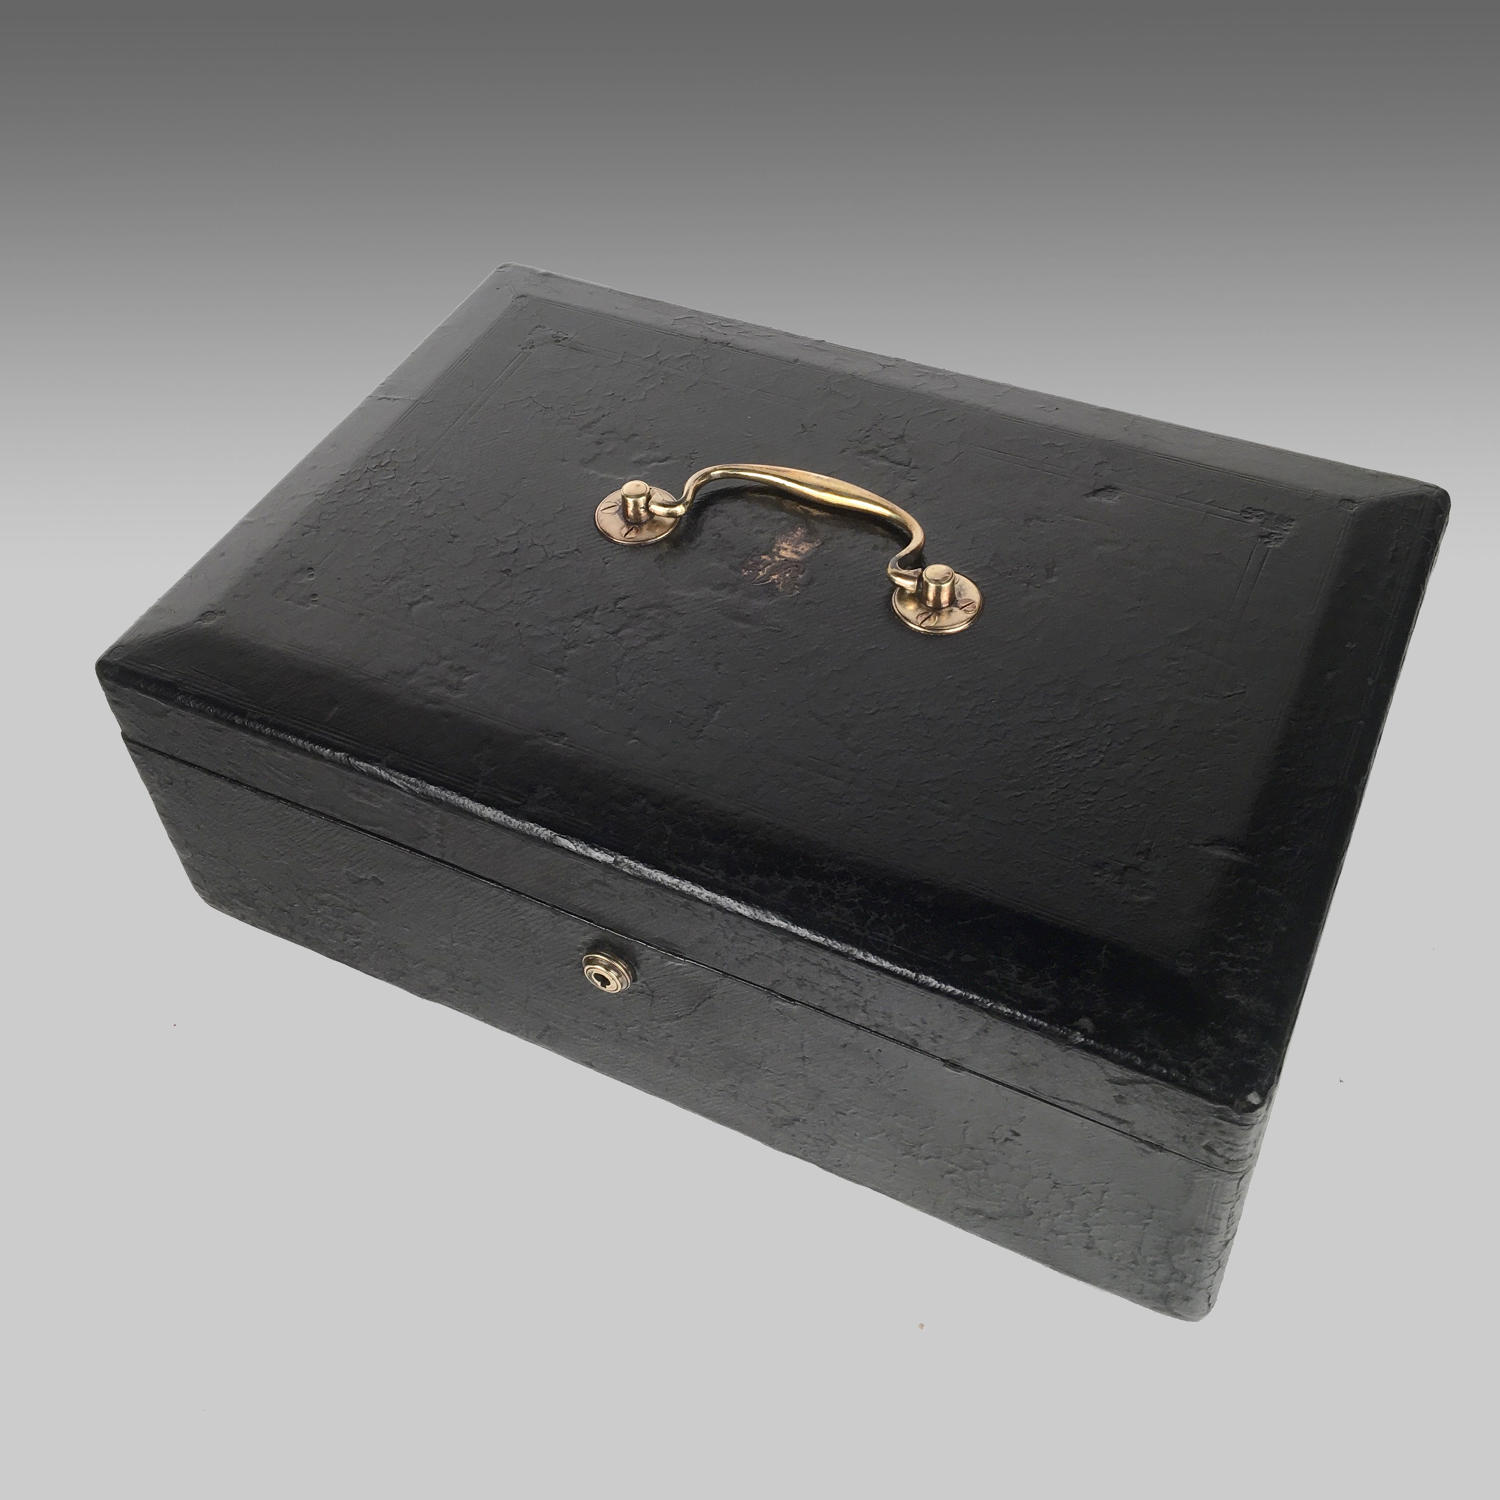 Black leather Government despatch box by William Wickwar & Company